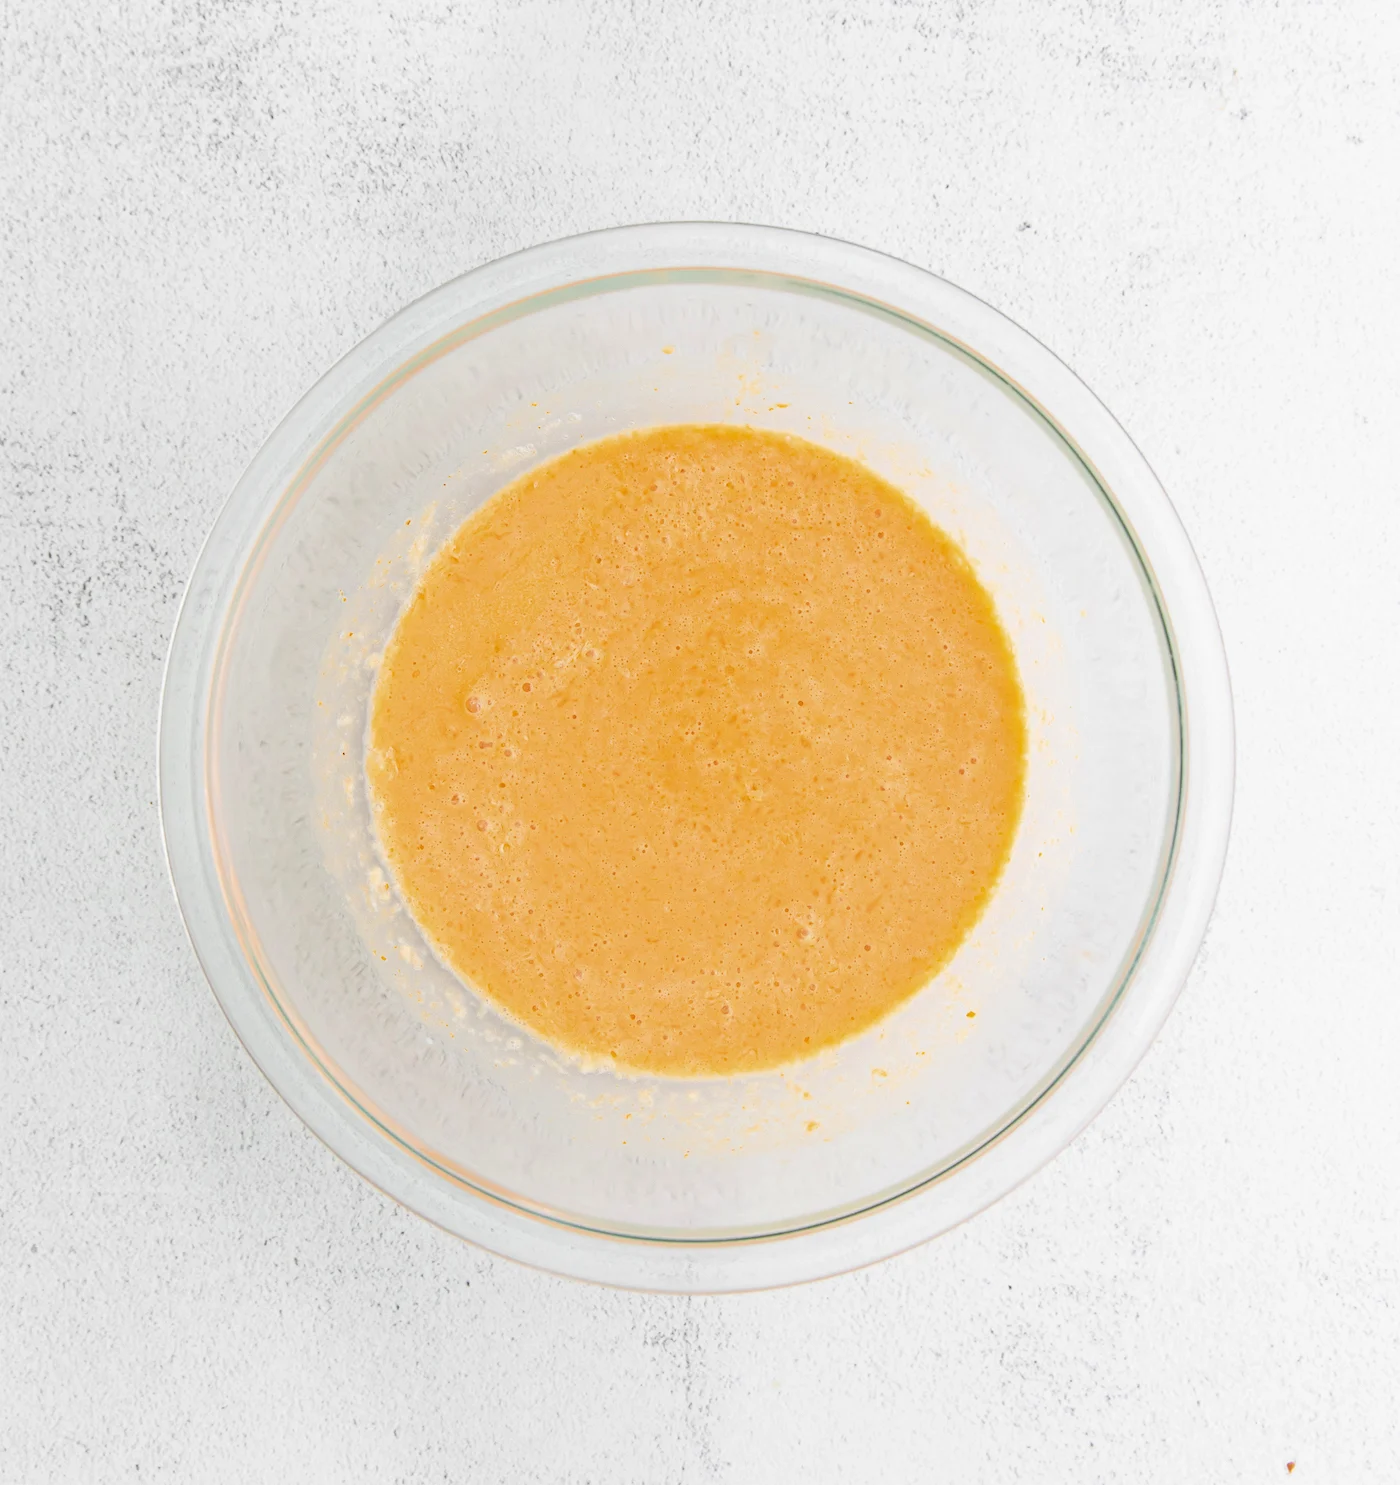 Mix together the milk, brown sugar, egg, pumpkin puree, melted butter, and vanilla extract